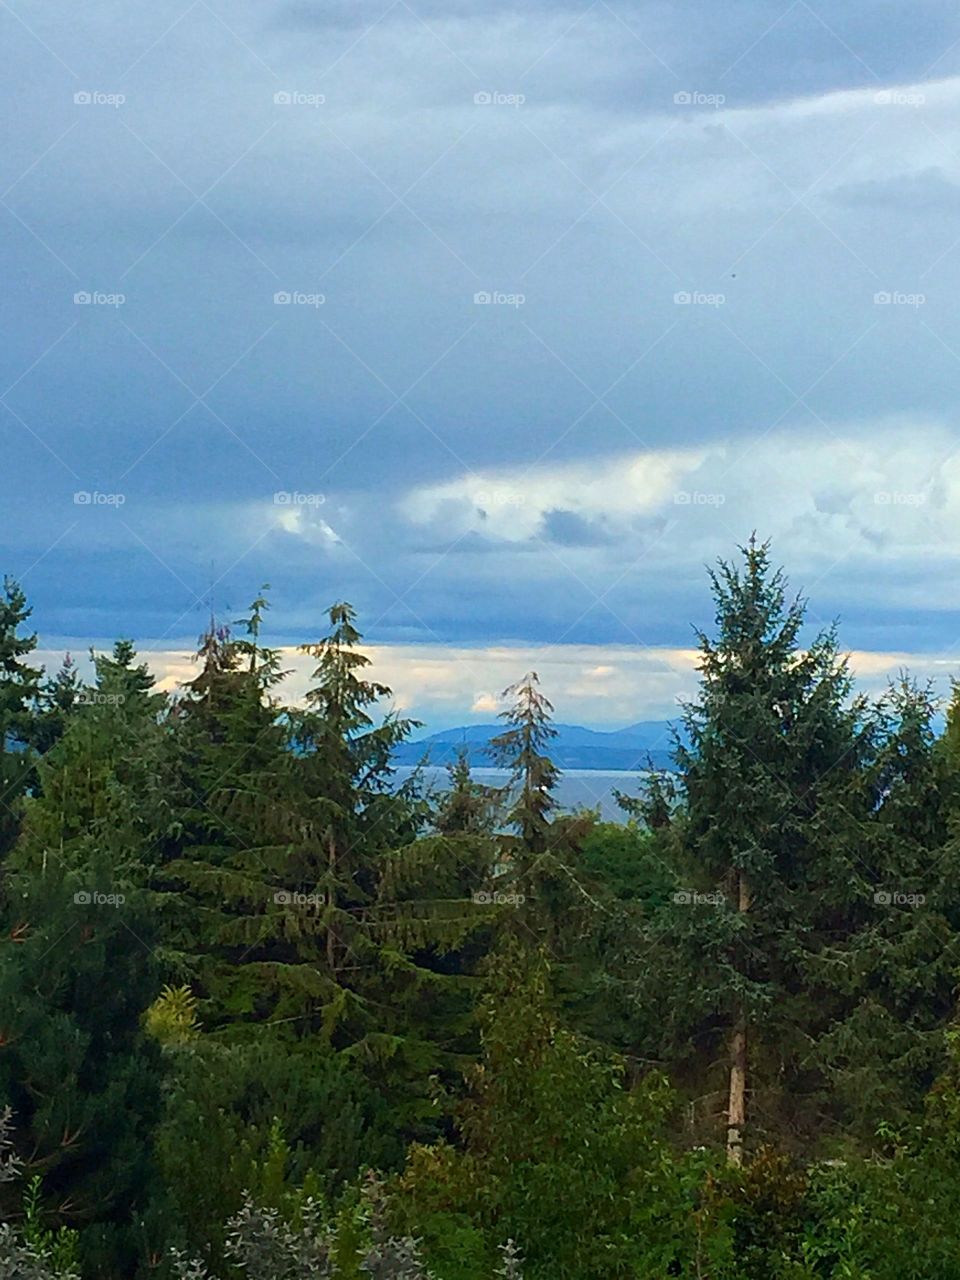 Pacific NW. A storm is coming in over the Puget Sound